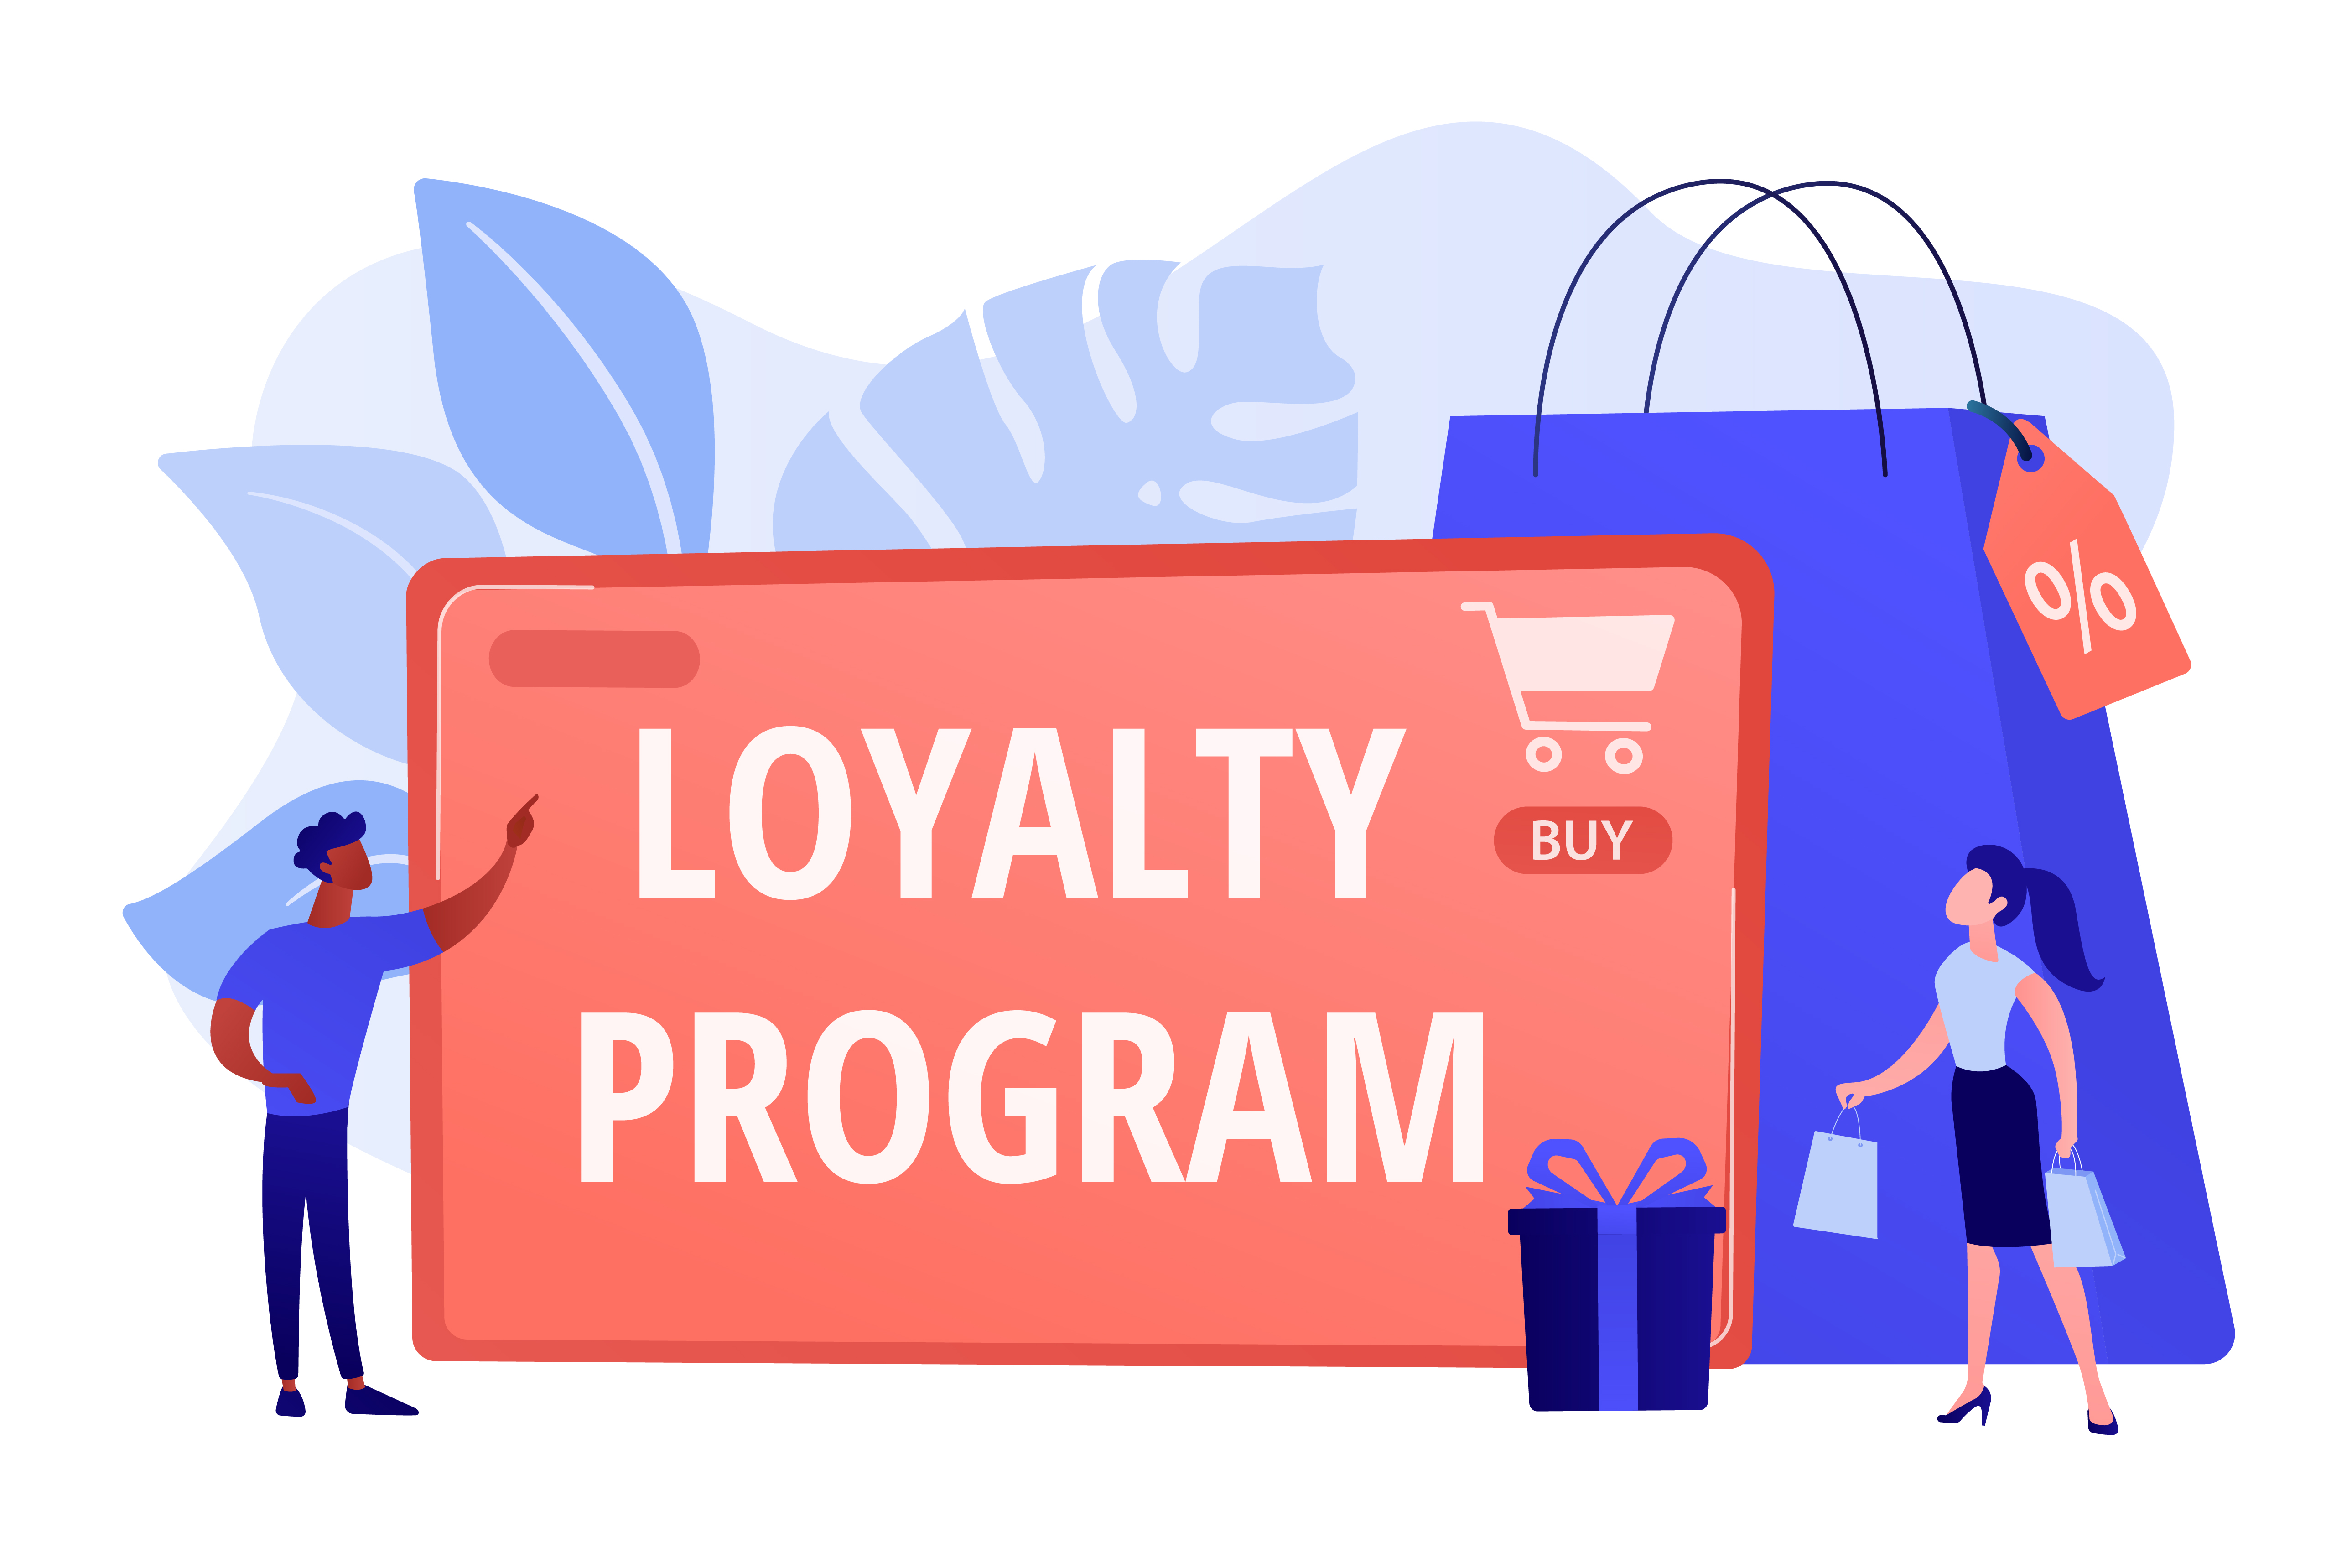 An NFT-powered loyalty program can drive competitive advantage for brands globally